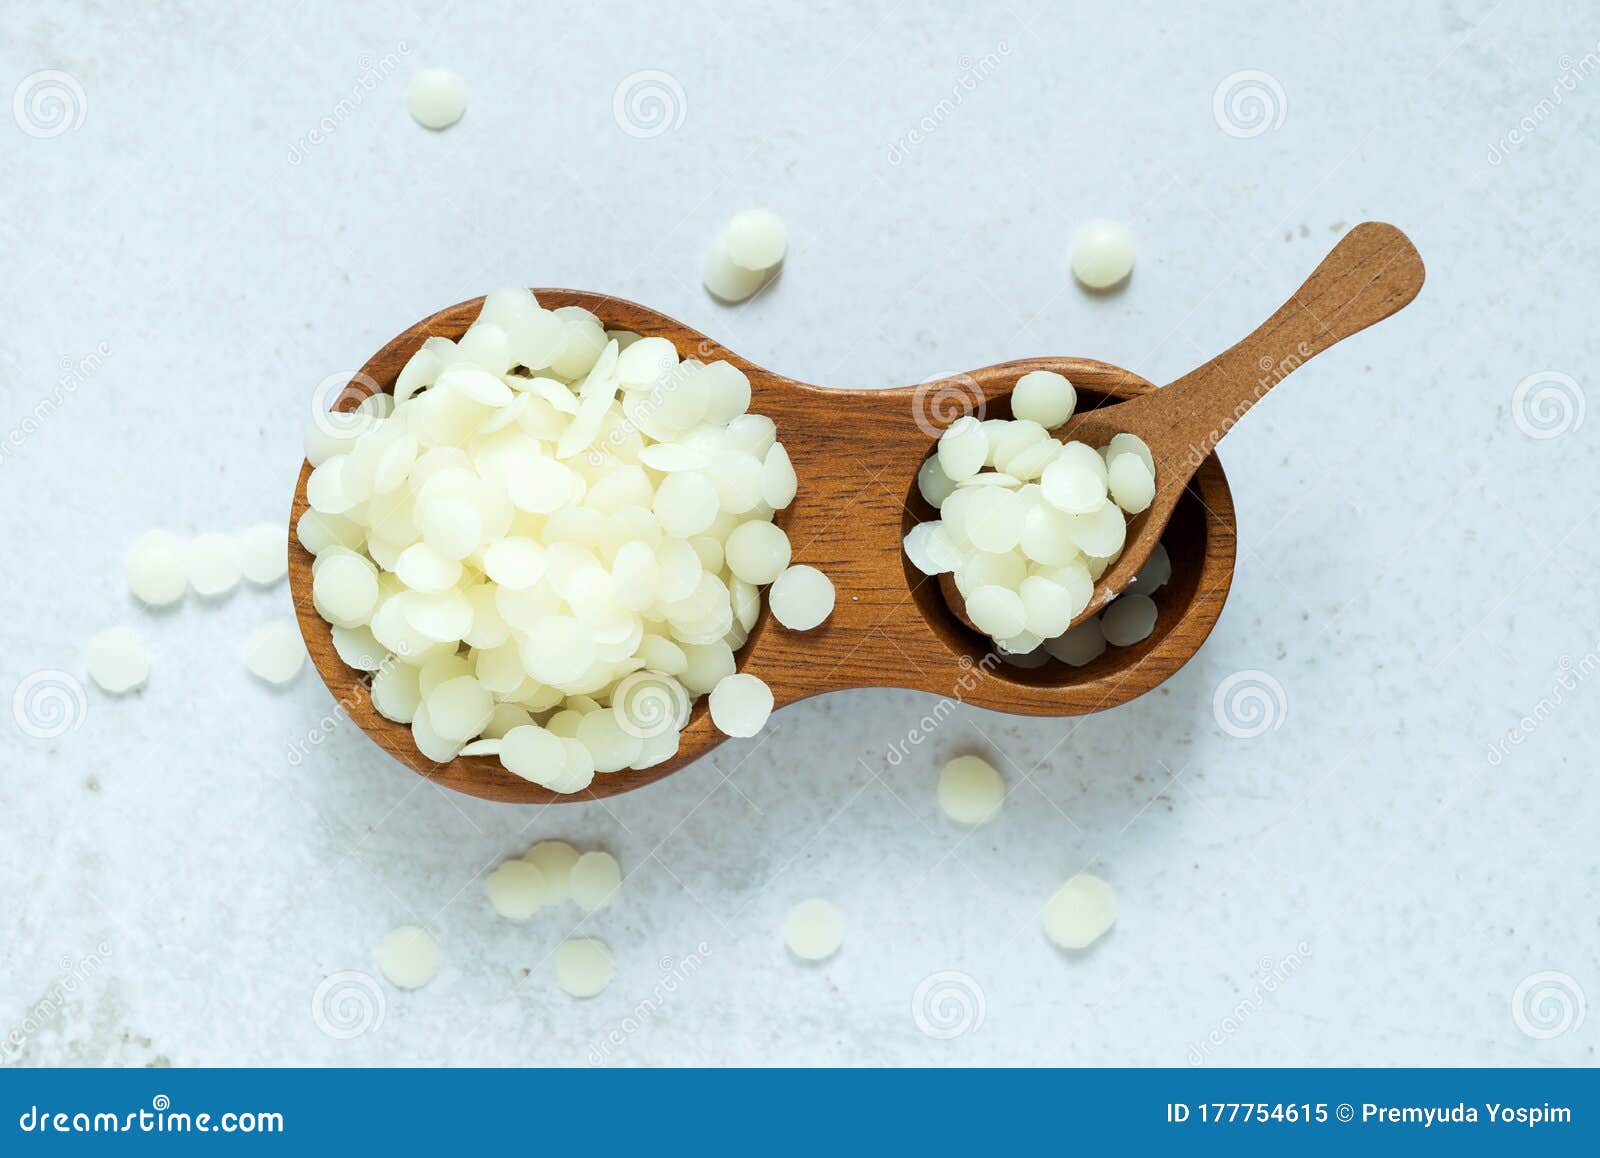 yellow and white cosmetic beeswax pellets in white ceramic bowl for  homemade natural beauty and D.I.Y. project. Stock Photo